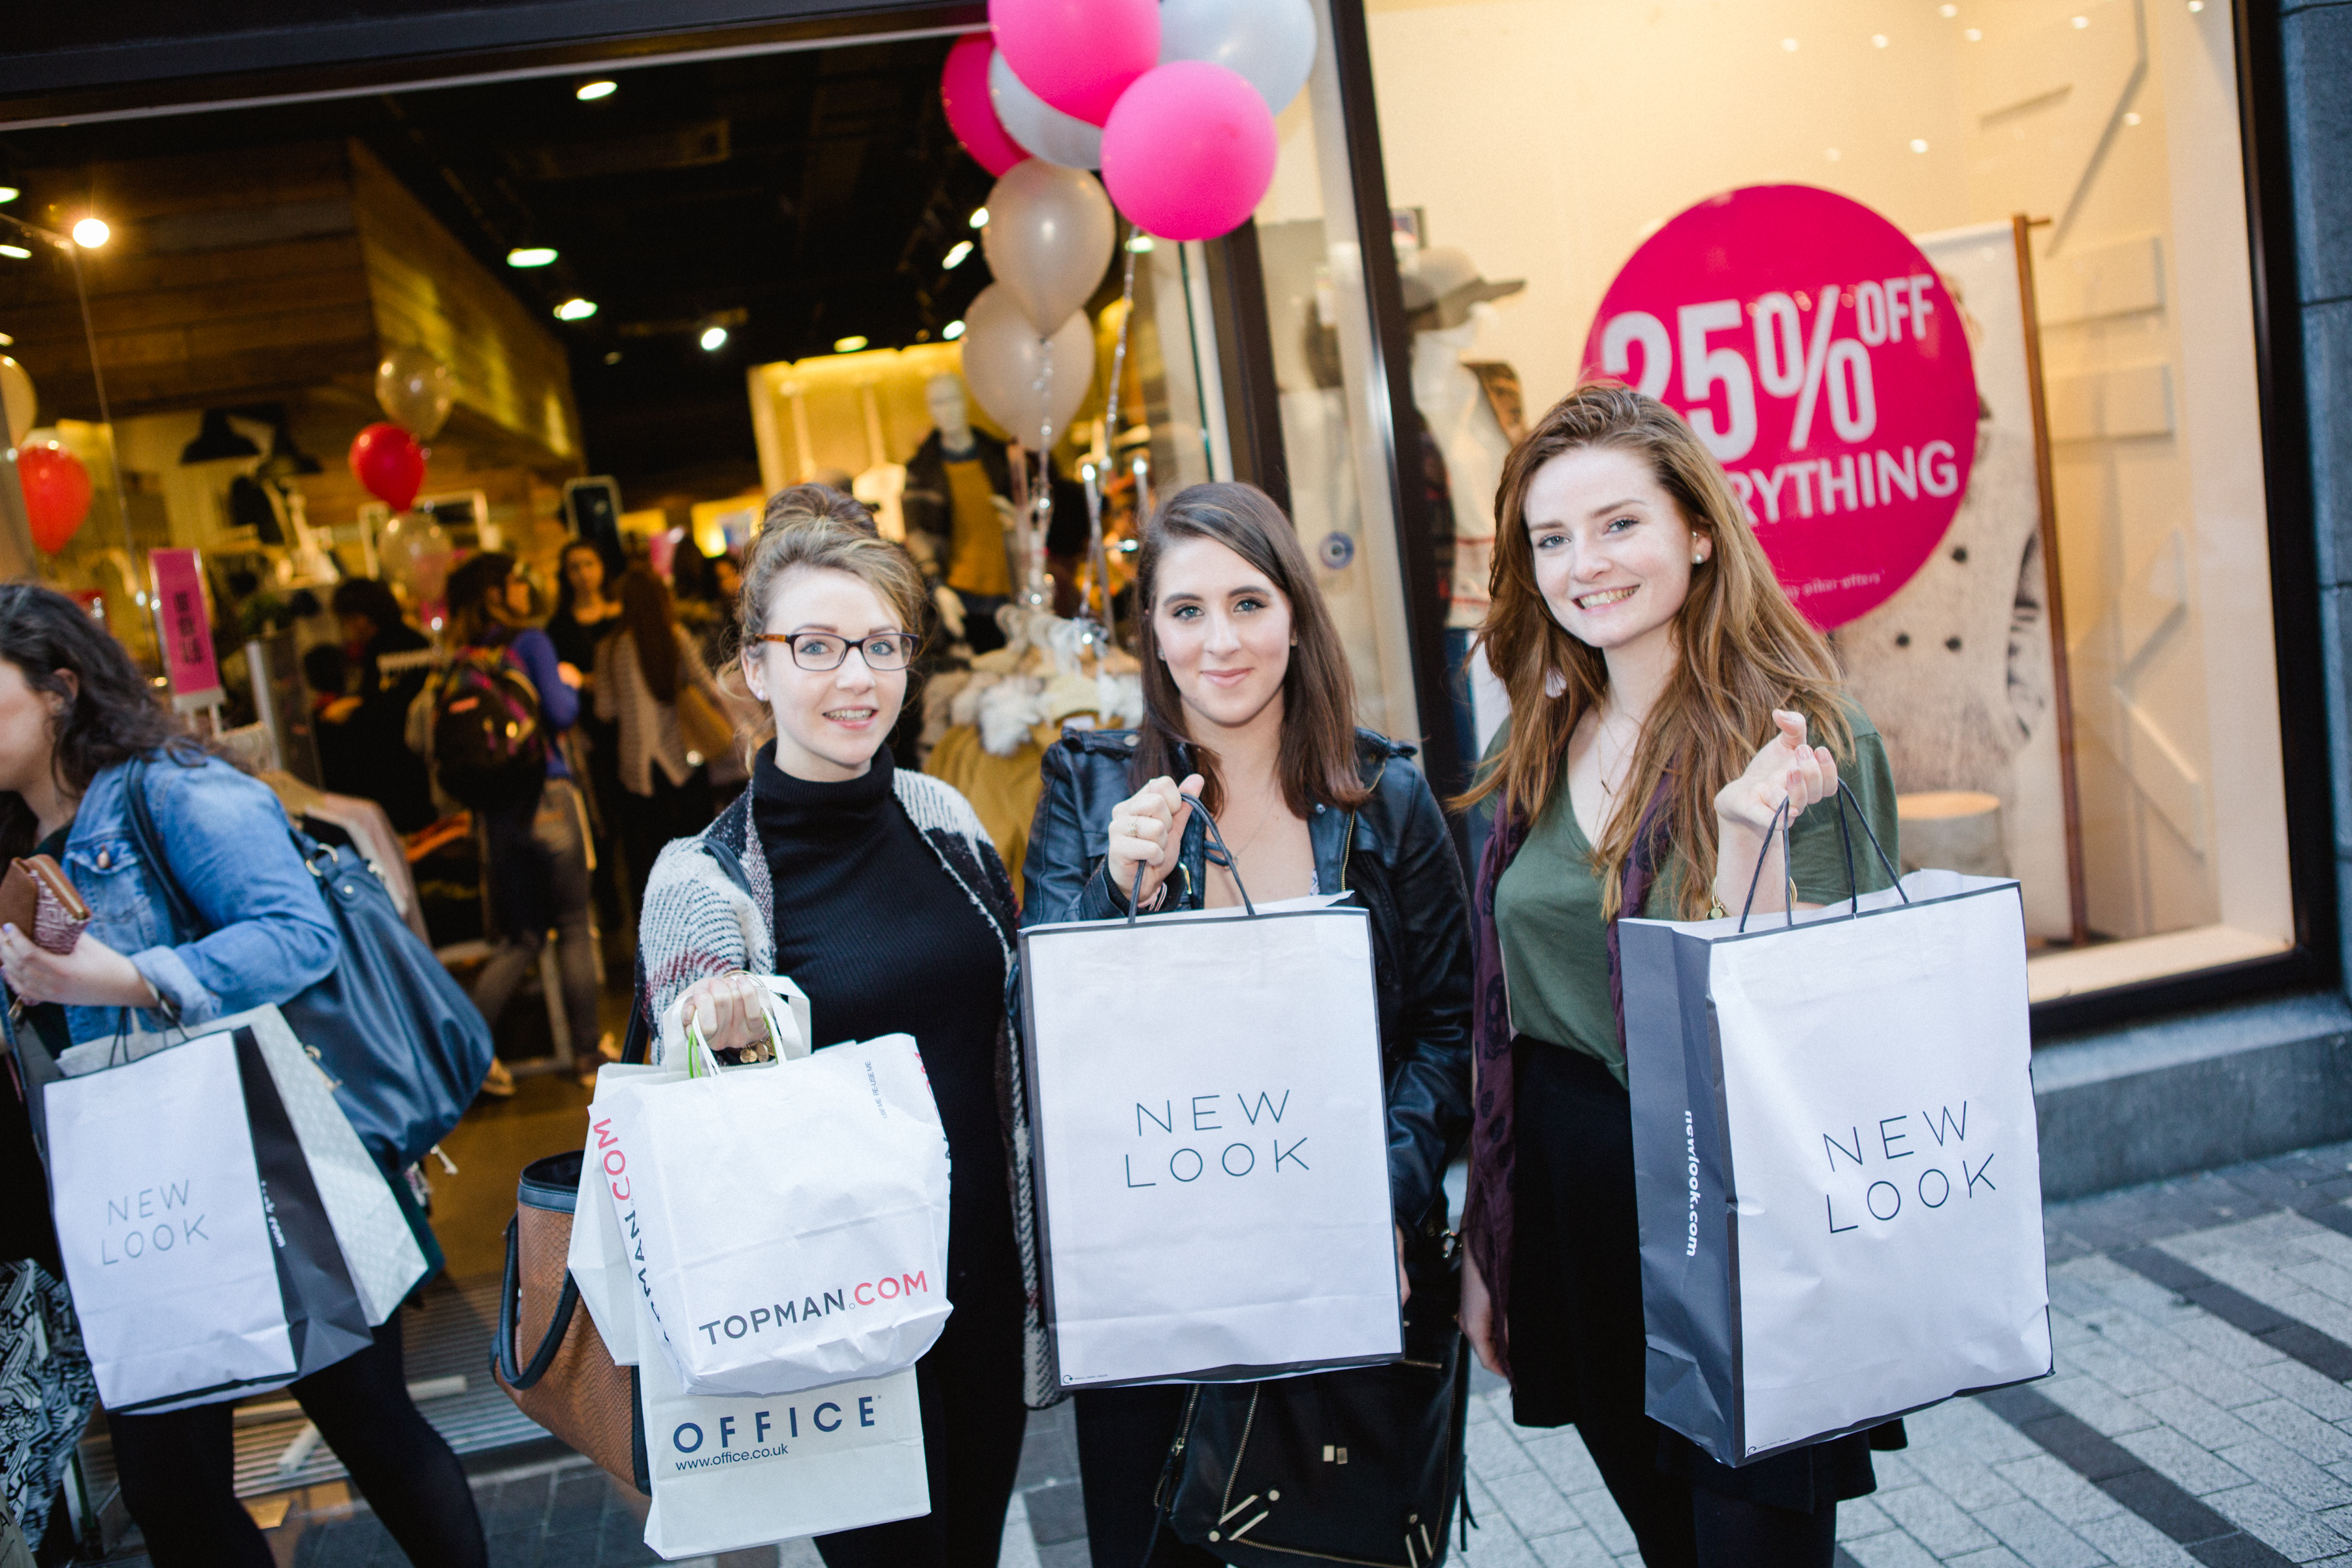 Aisling, Sarah and Gemma sporting this years most sought after accessory - a shopping bag from Opera Lane!